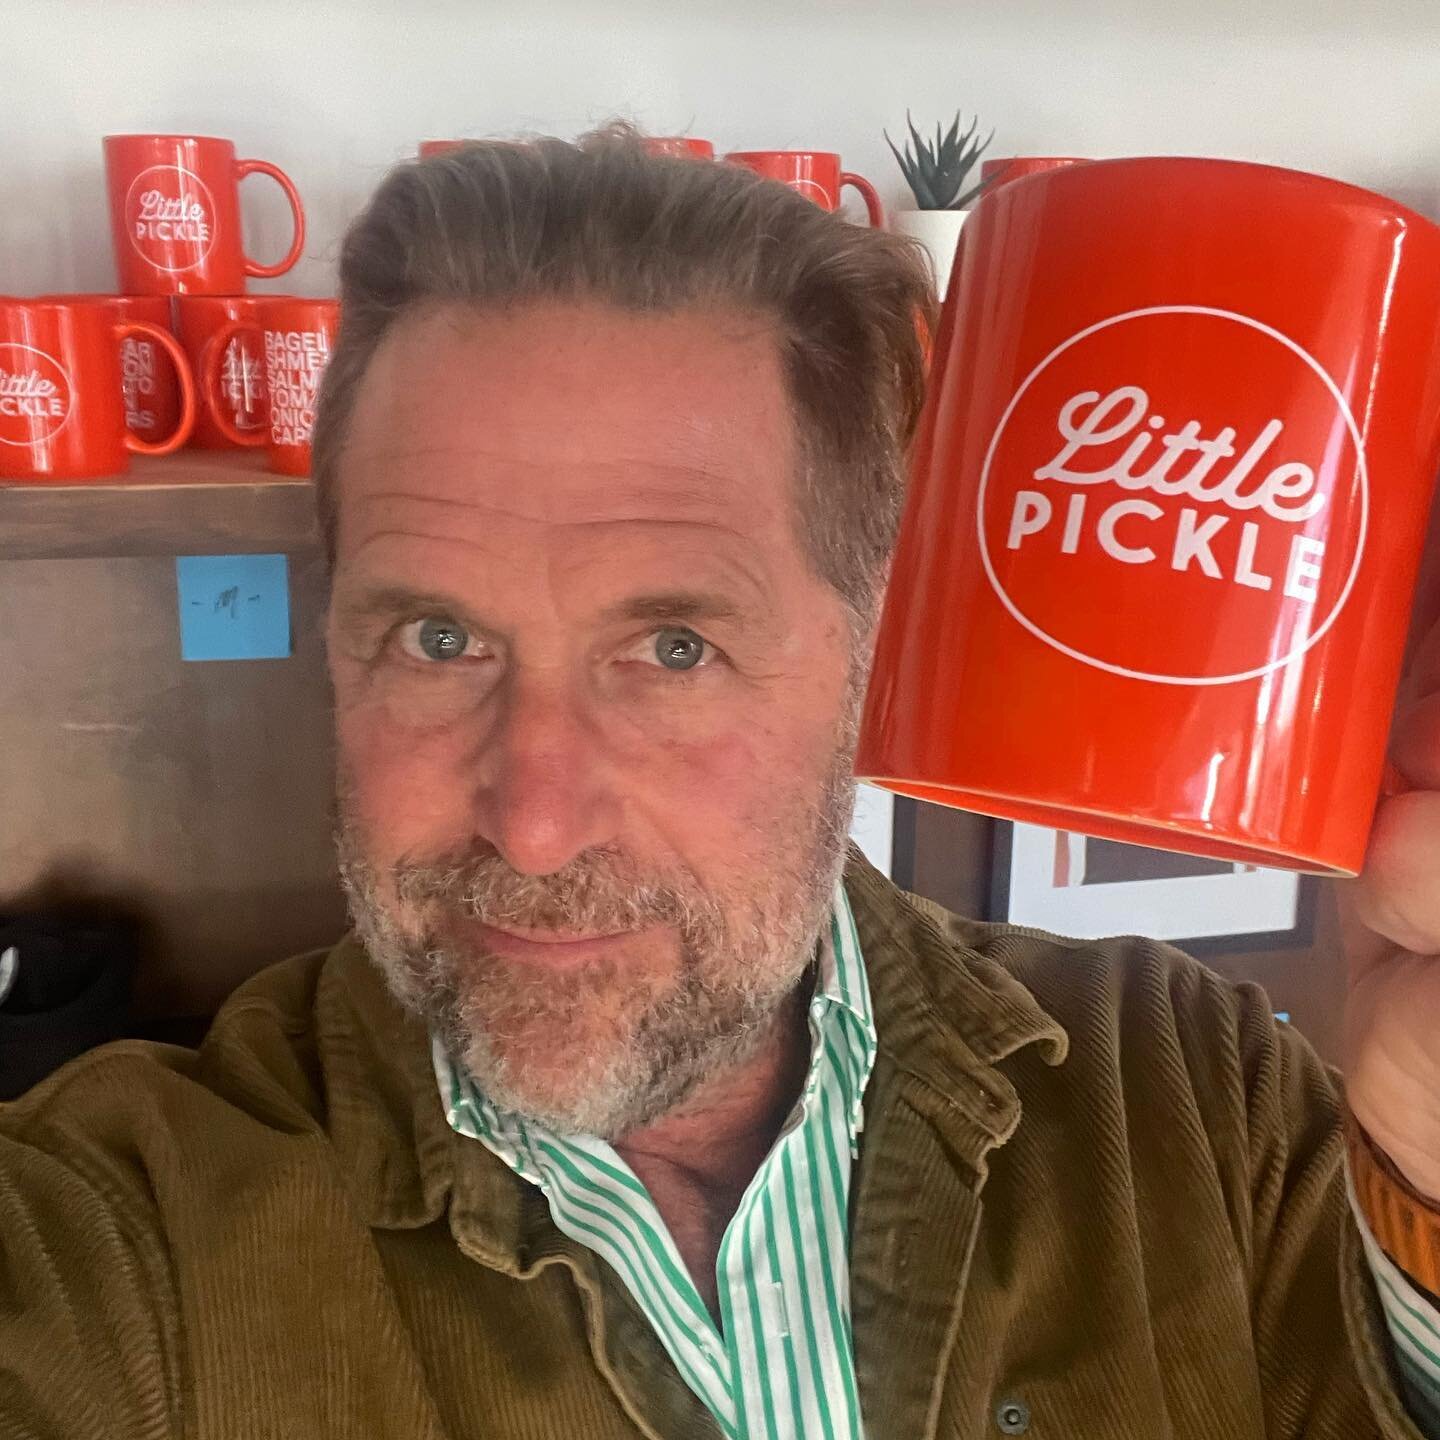 Hey Pickle Peeps, firstly thank you for the birthday wishes. This old cynical guy has been humbled by the support and love of this little experiment. I have always wanted to attempt this undertaking and all I can say is wow! You made ME a believer an